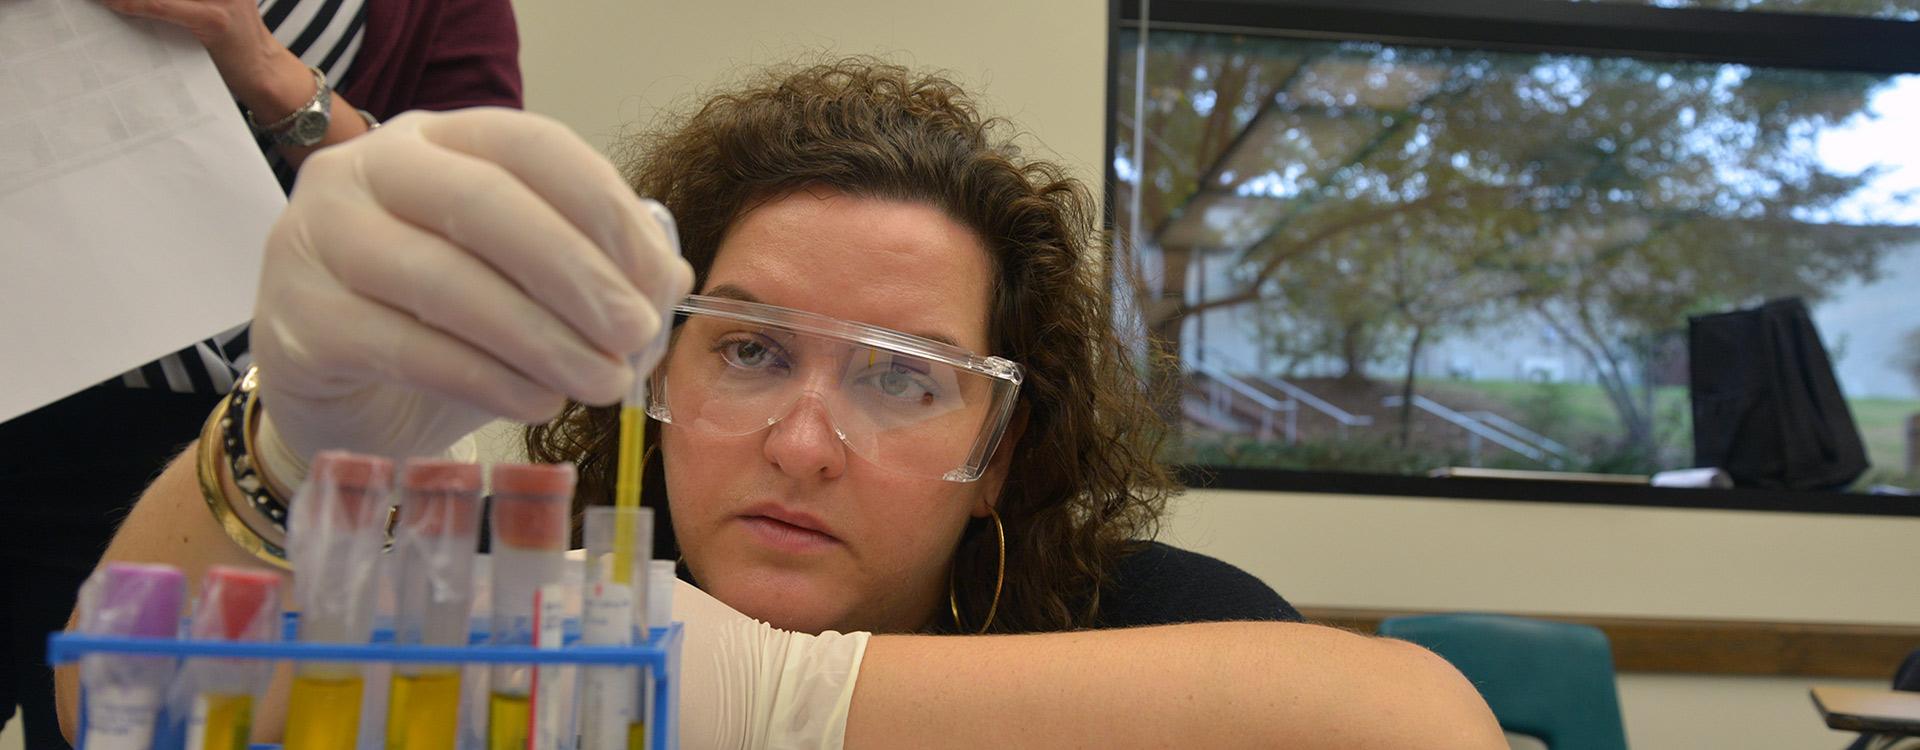 clinical trials student is using a pipette to extract fluid from a test tube